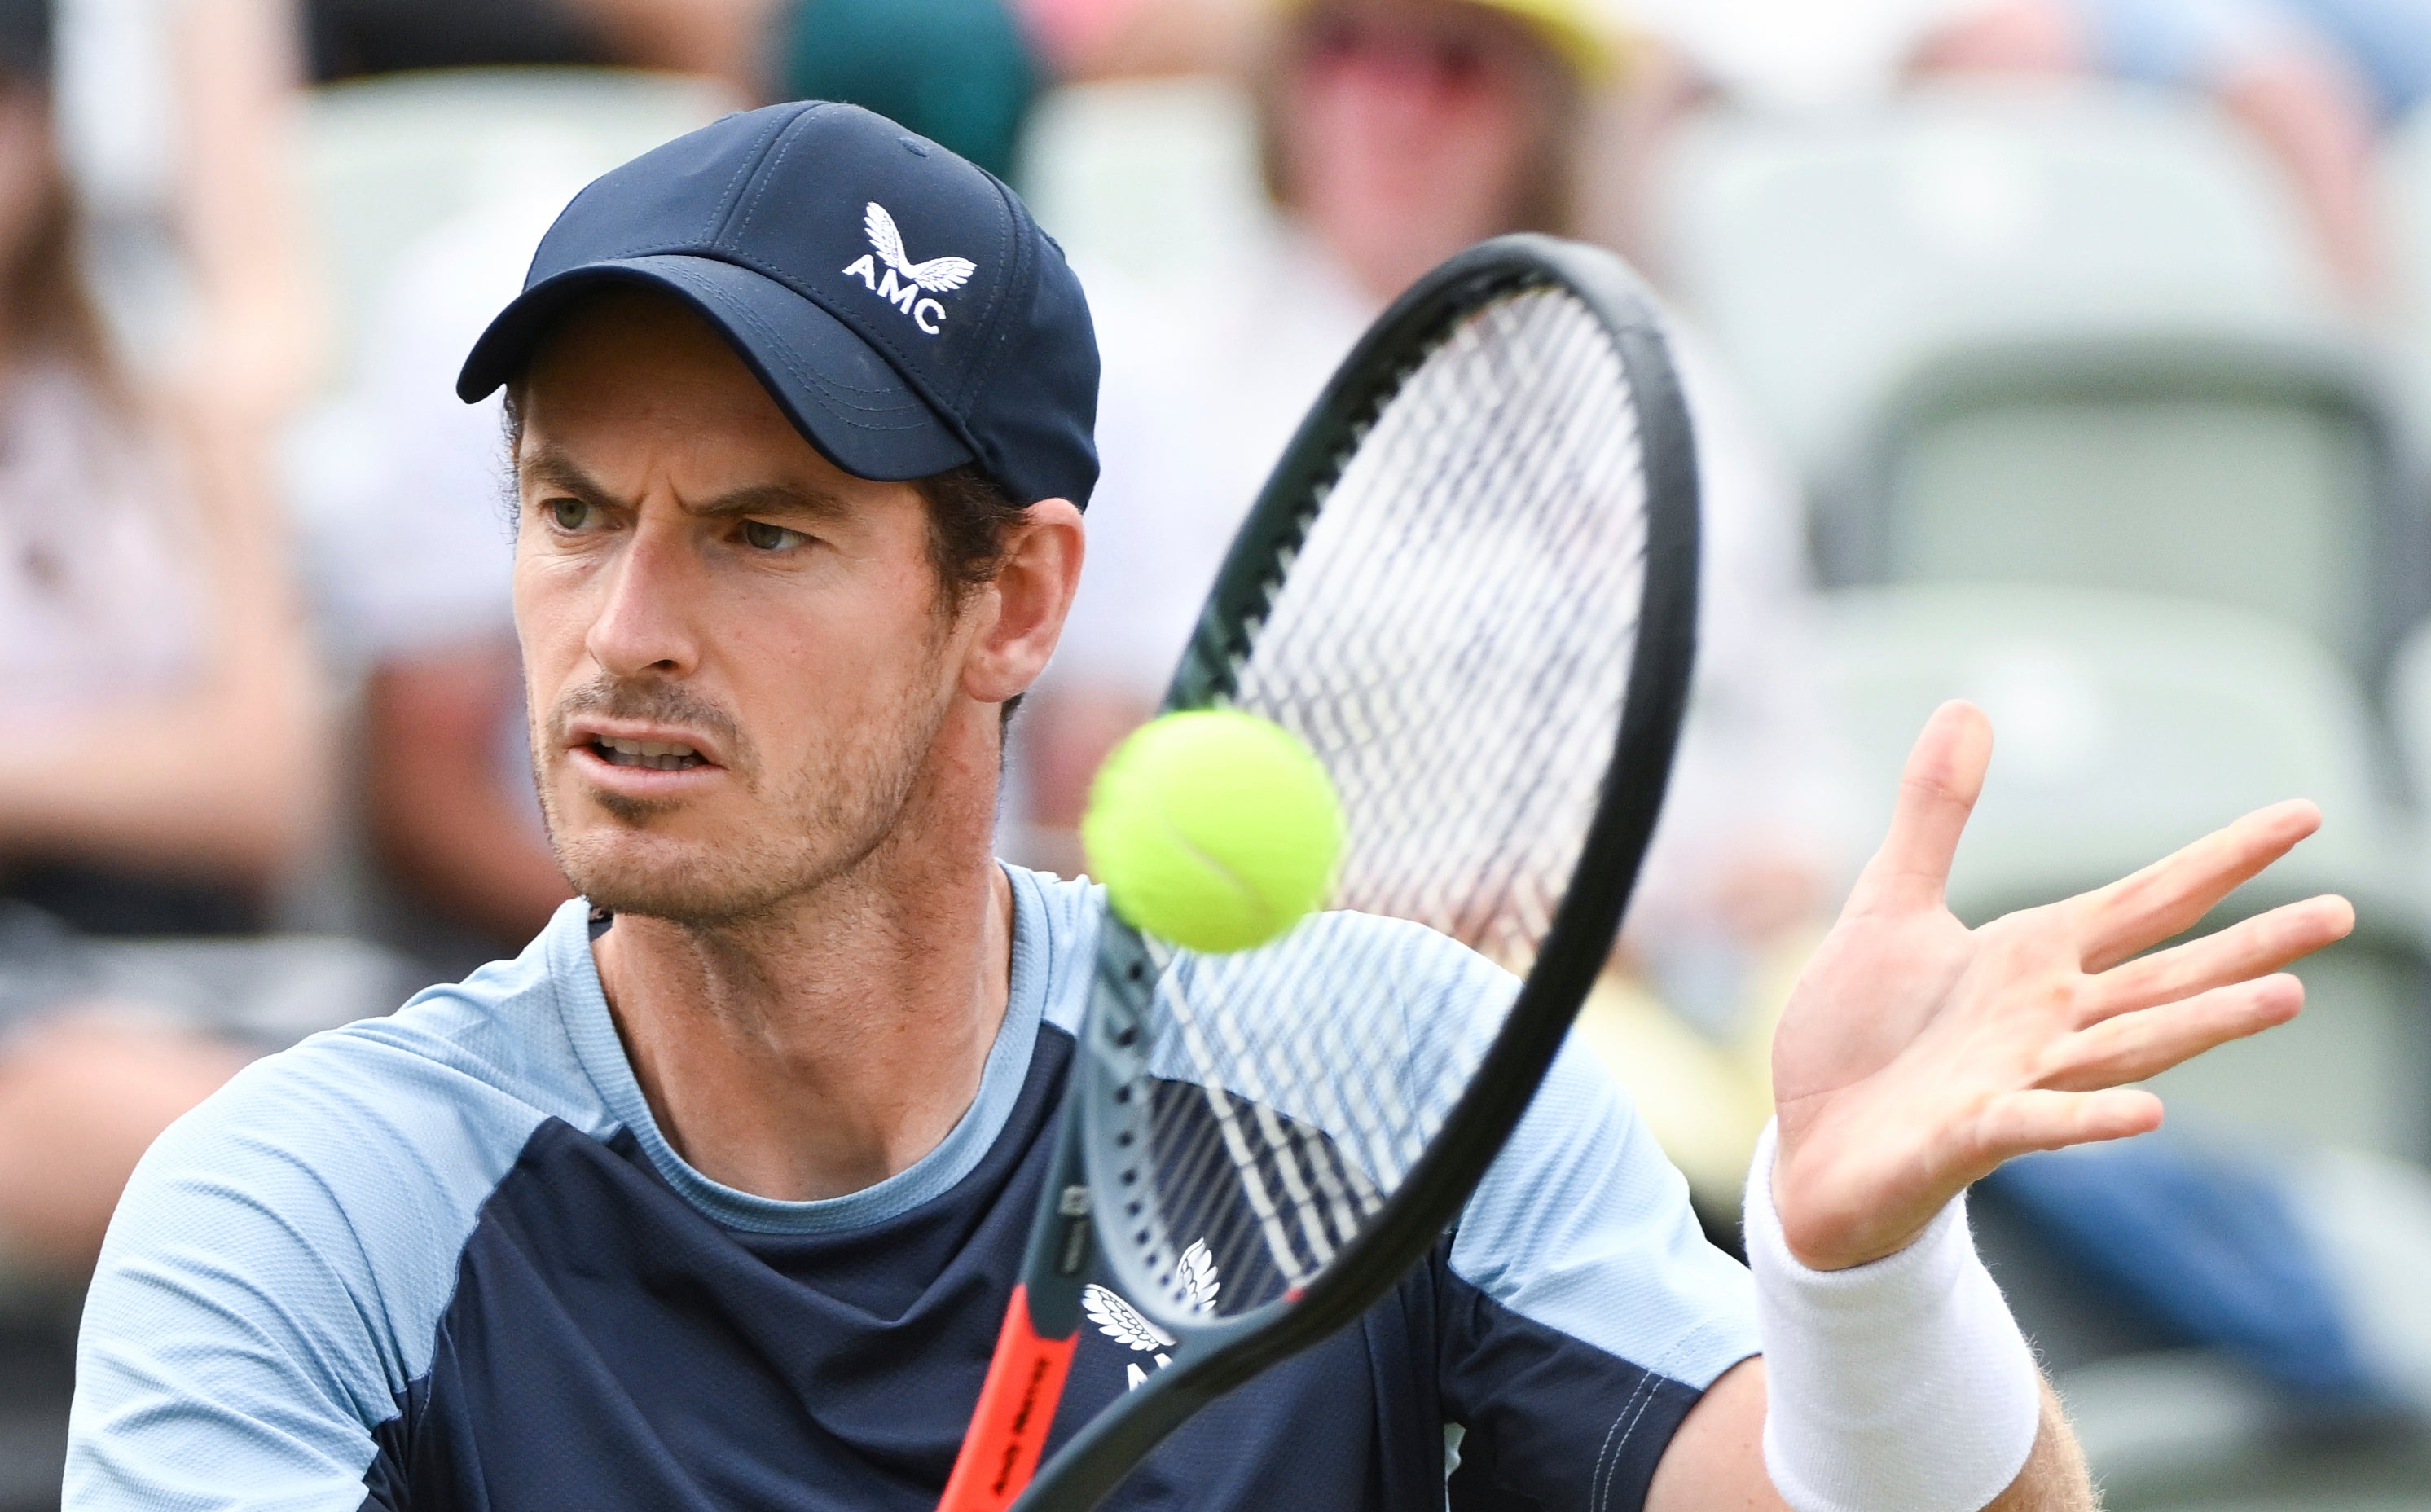 Andy Murray plays a return to Italy's Matteo Berrettini